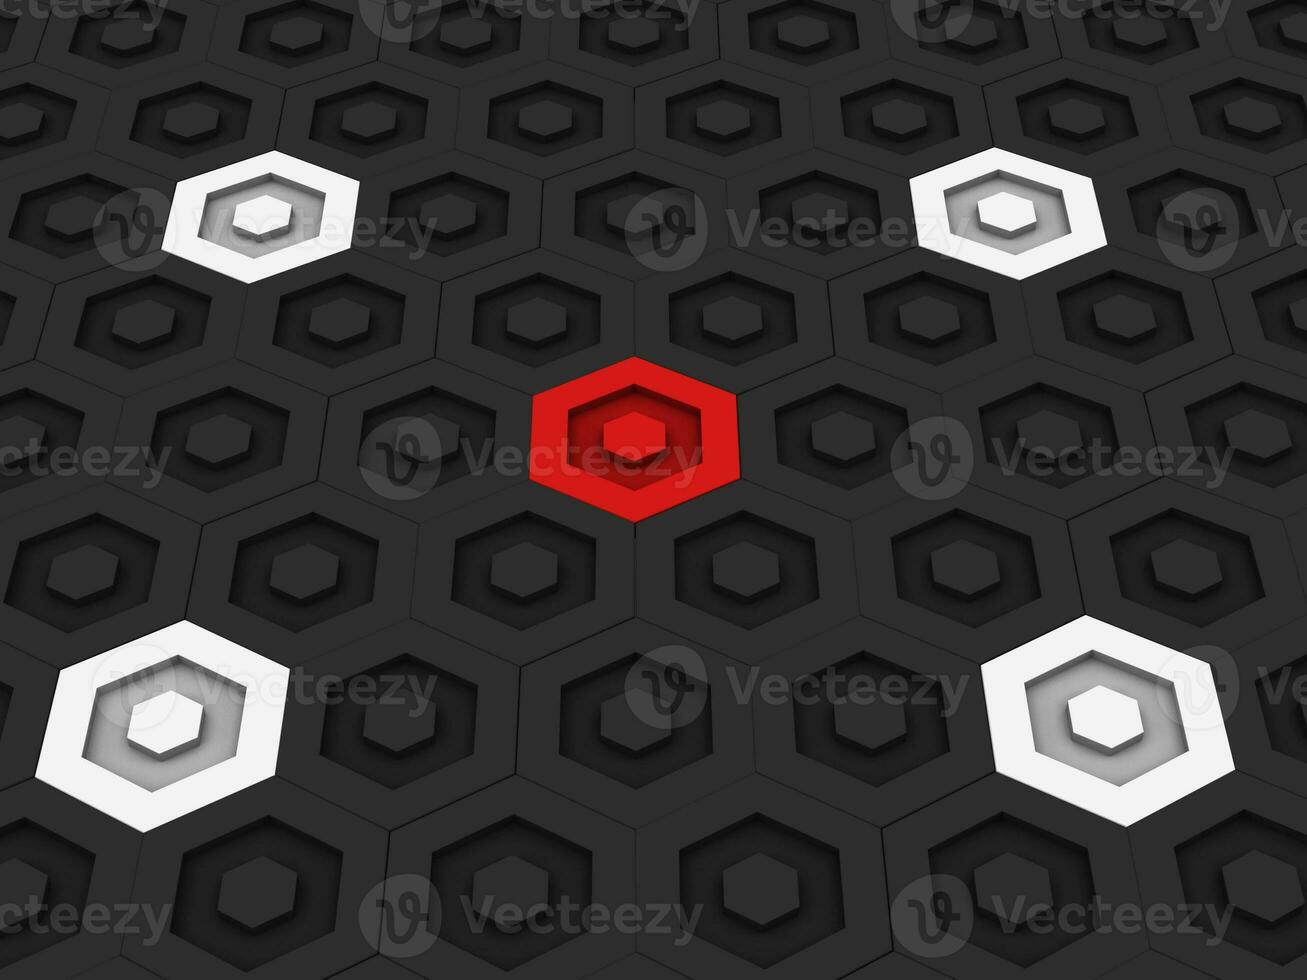 Beautiful dark hexagon background with white and red small hexagons visually standing out photo